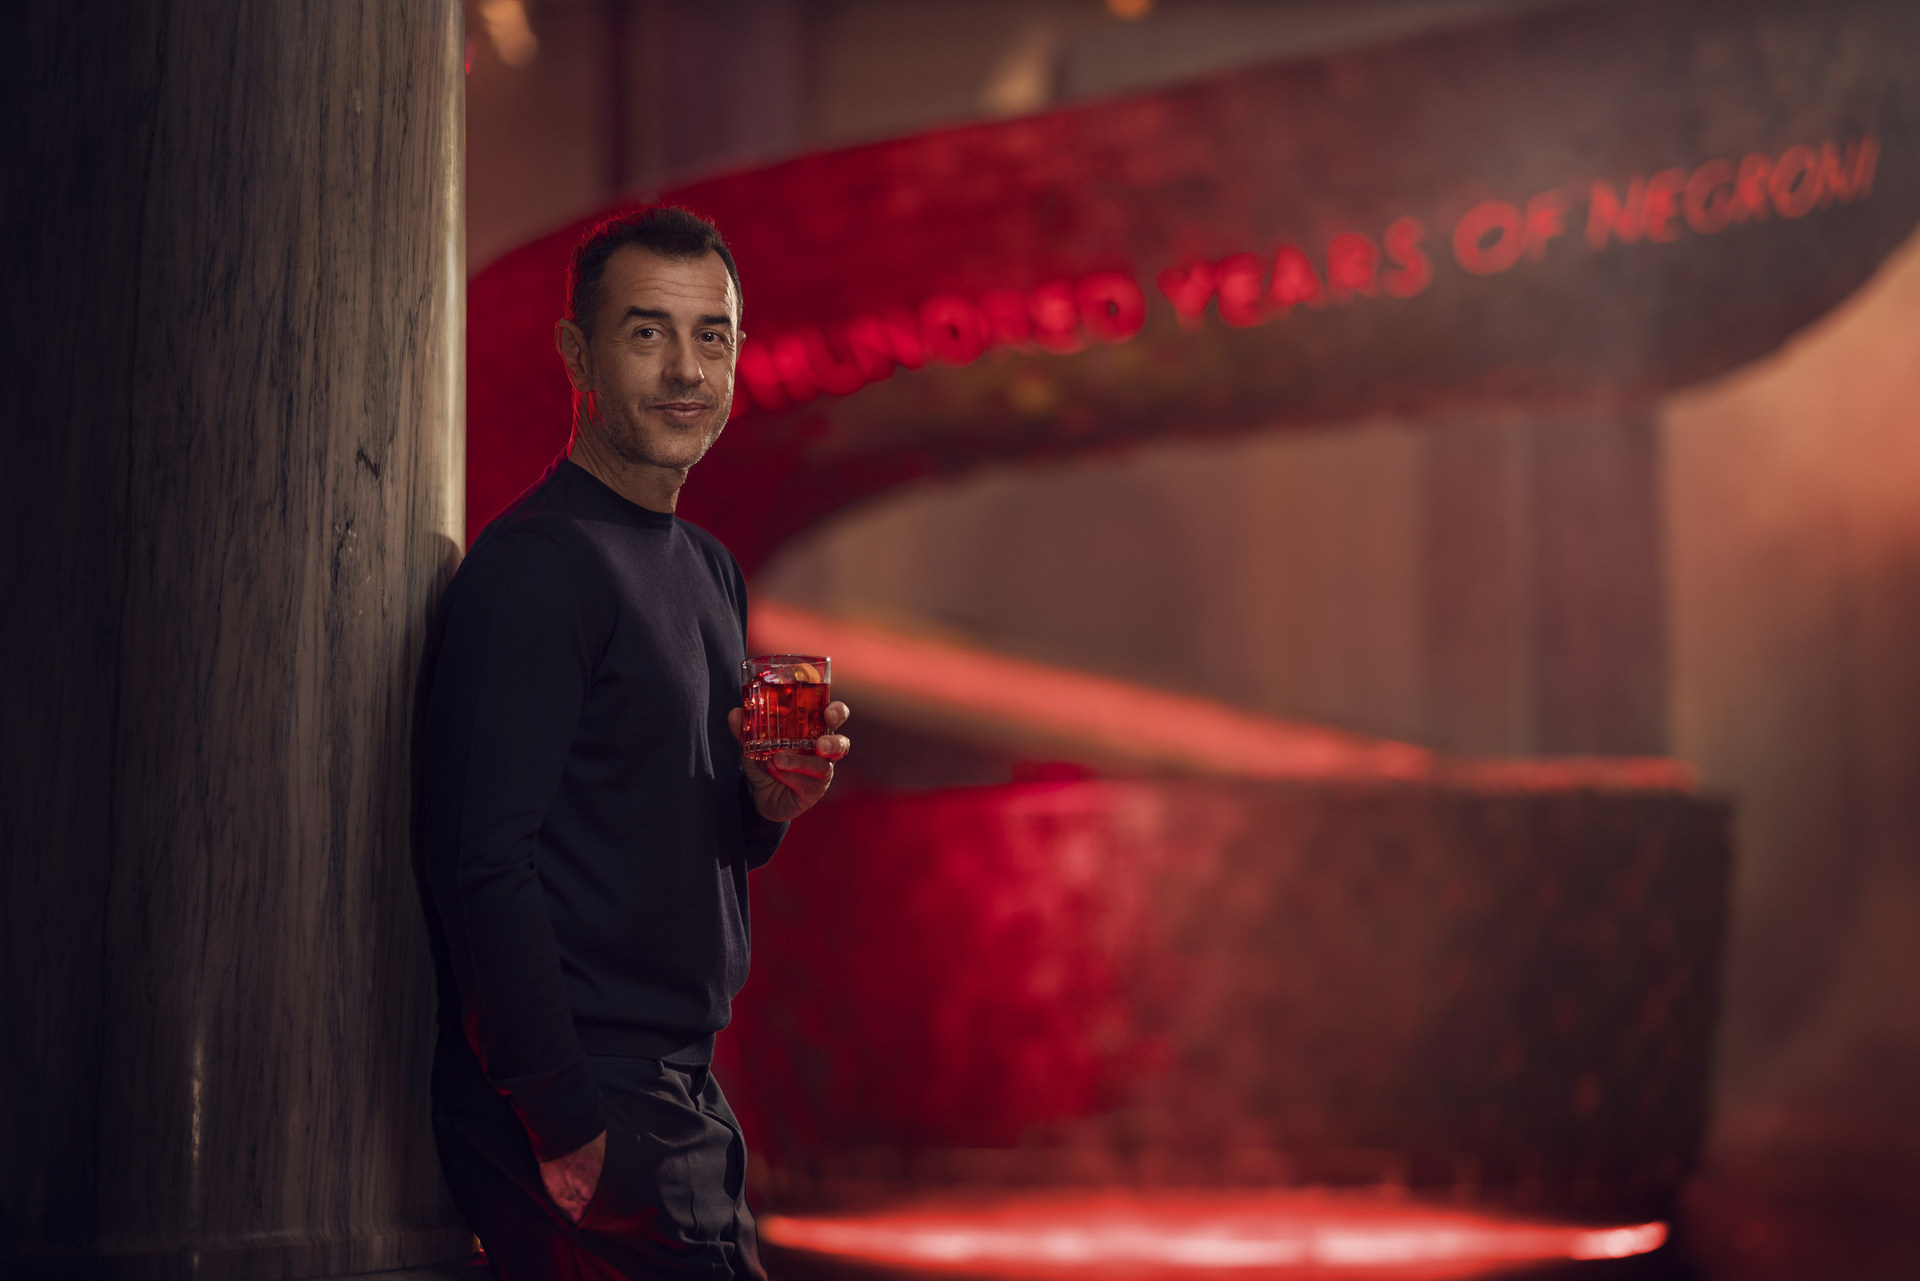 Matteo Garrone on the set of Entering Red, his latest masterpiece, filmed for Campari as part of the 2019 Red Diaries campaign, staring Ana De Armas